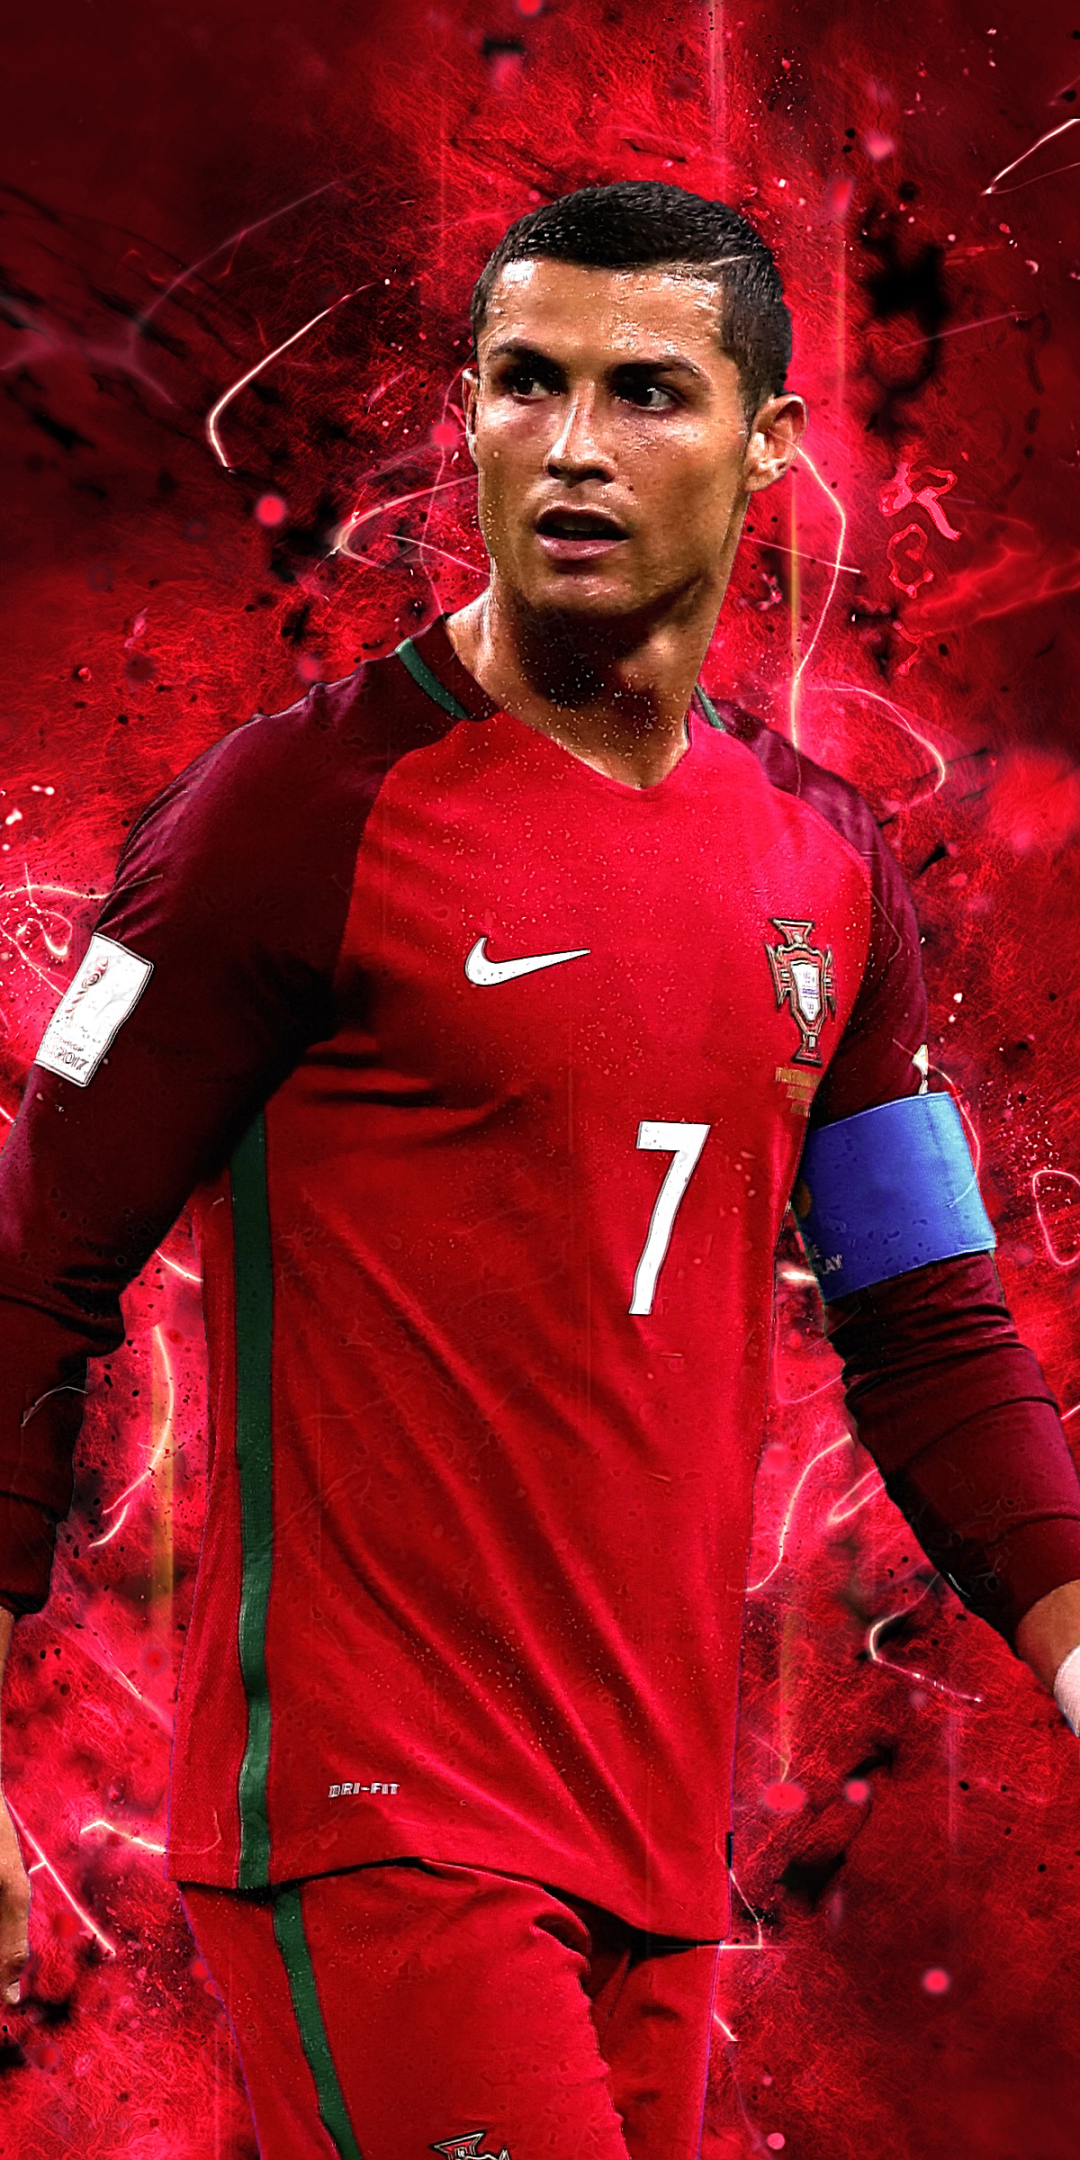 Cristiano Ronaldo Wallpapers for Android - Download